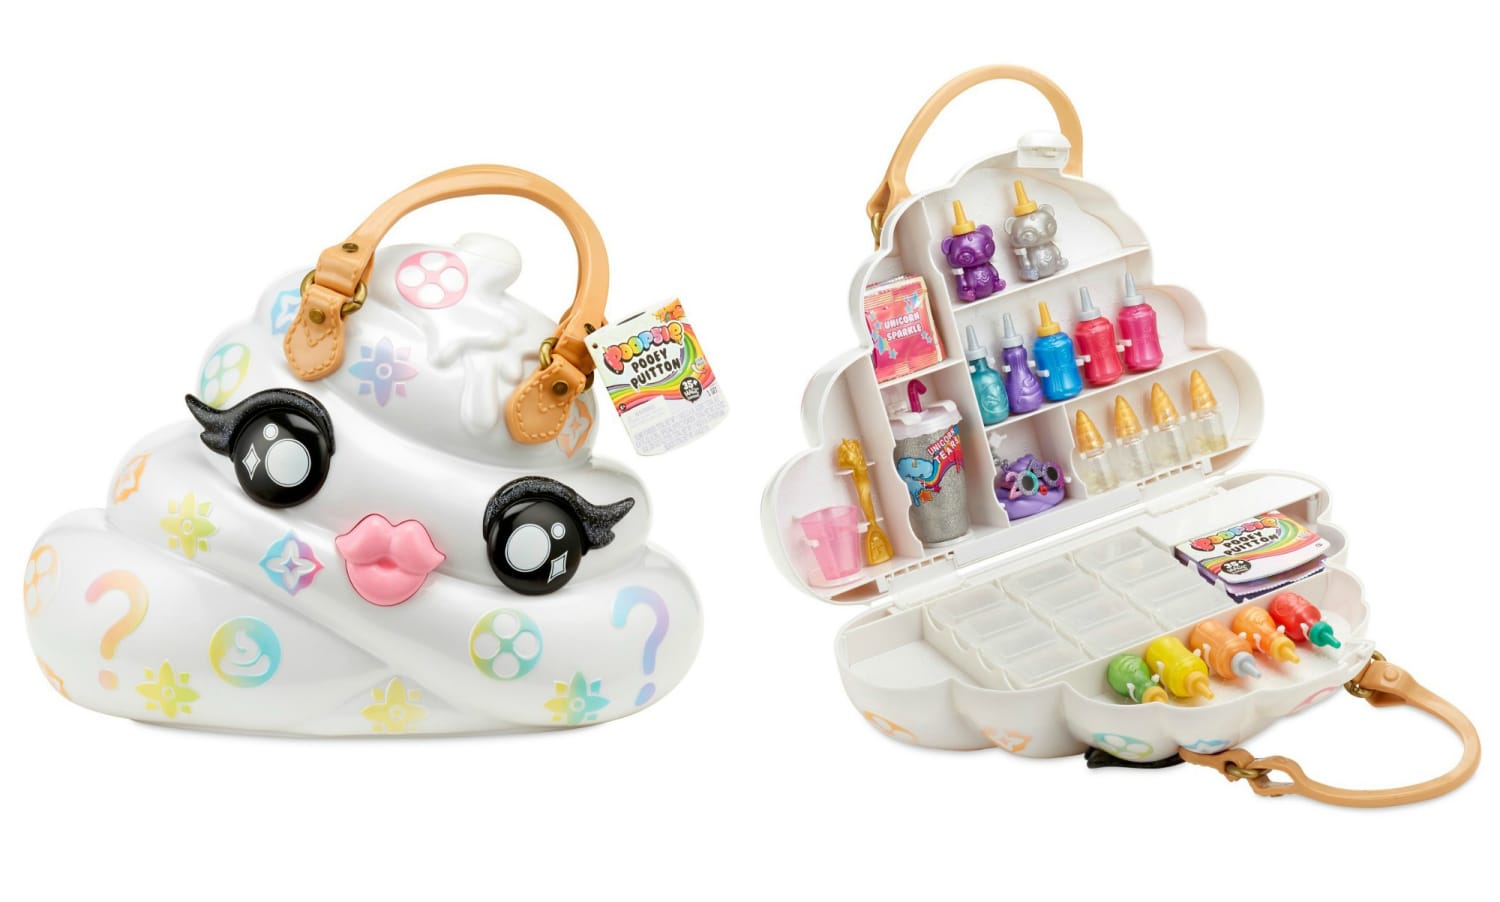 Pooey Puitton' Toy Purse Maker Sues LVMH